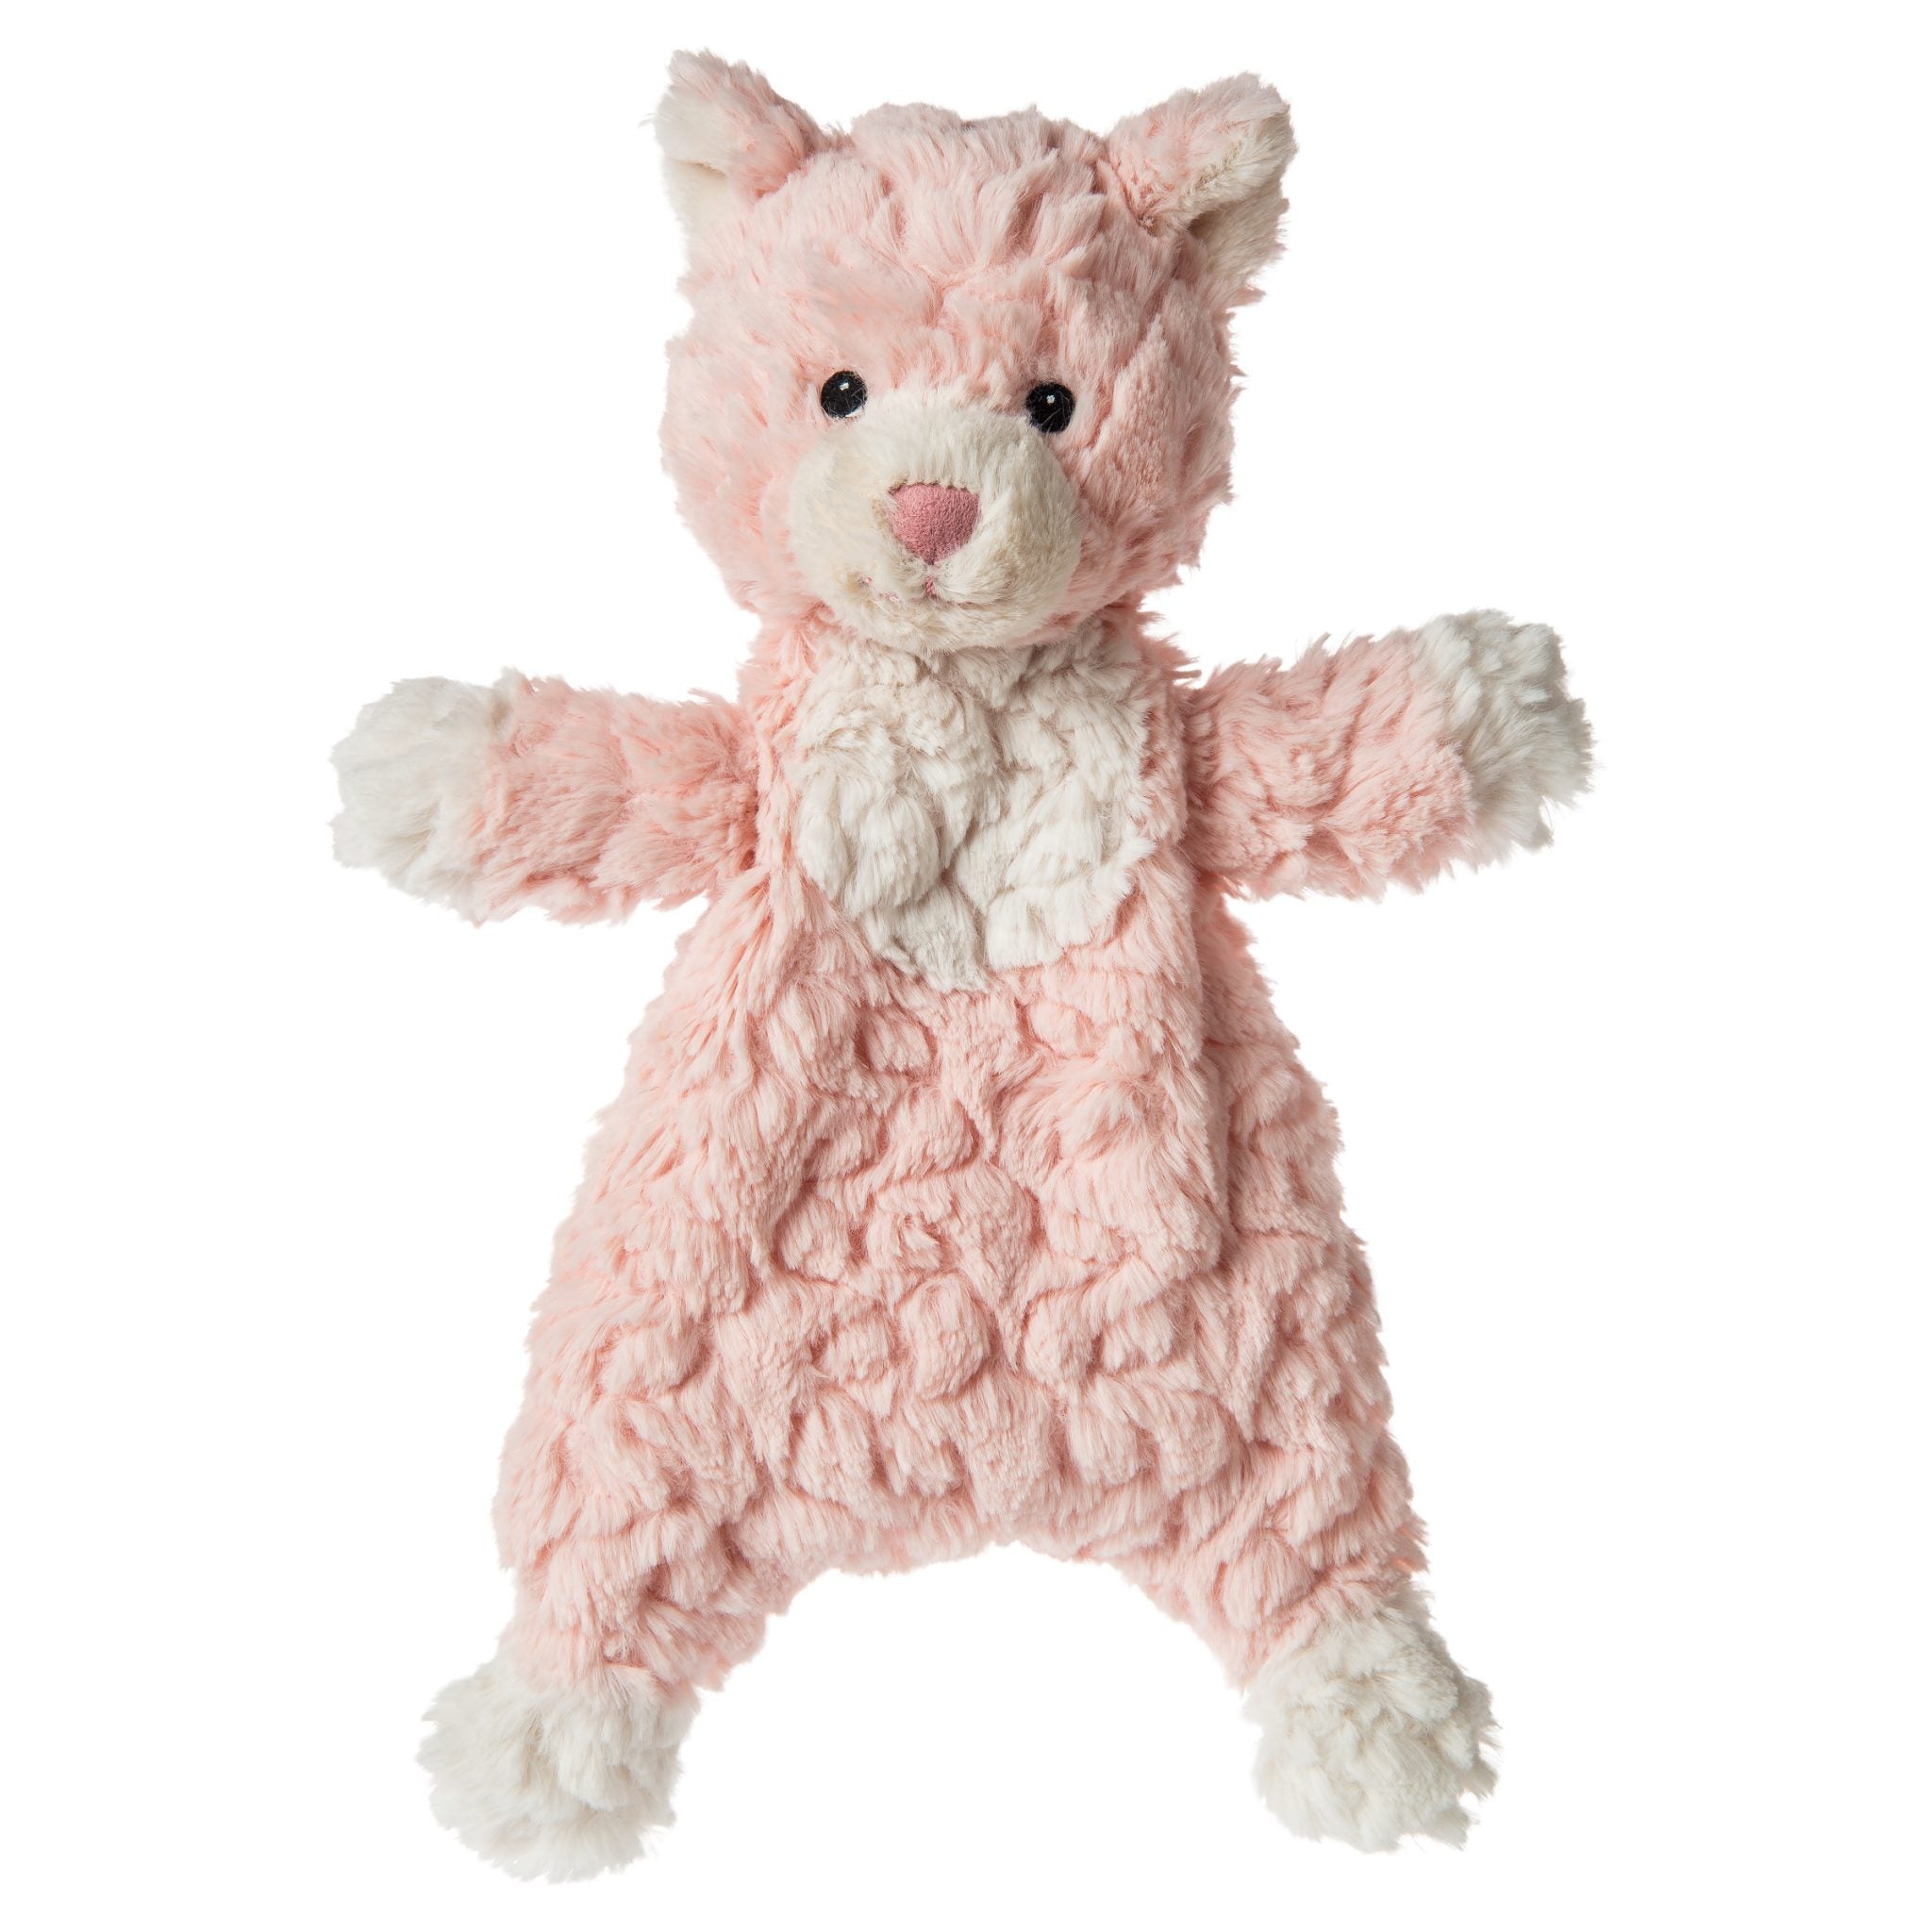 Light pink cat soft toy with white accents